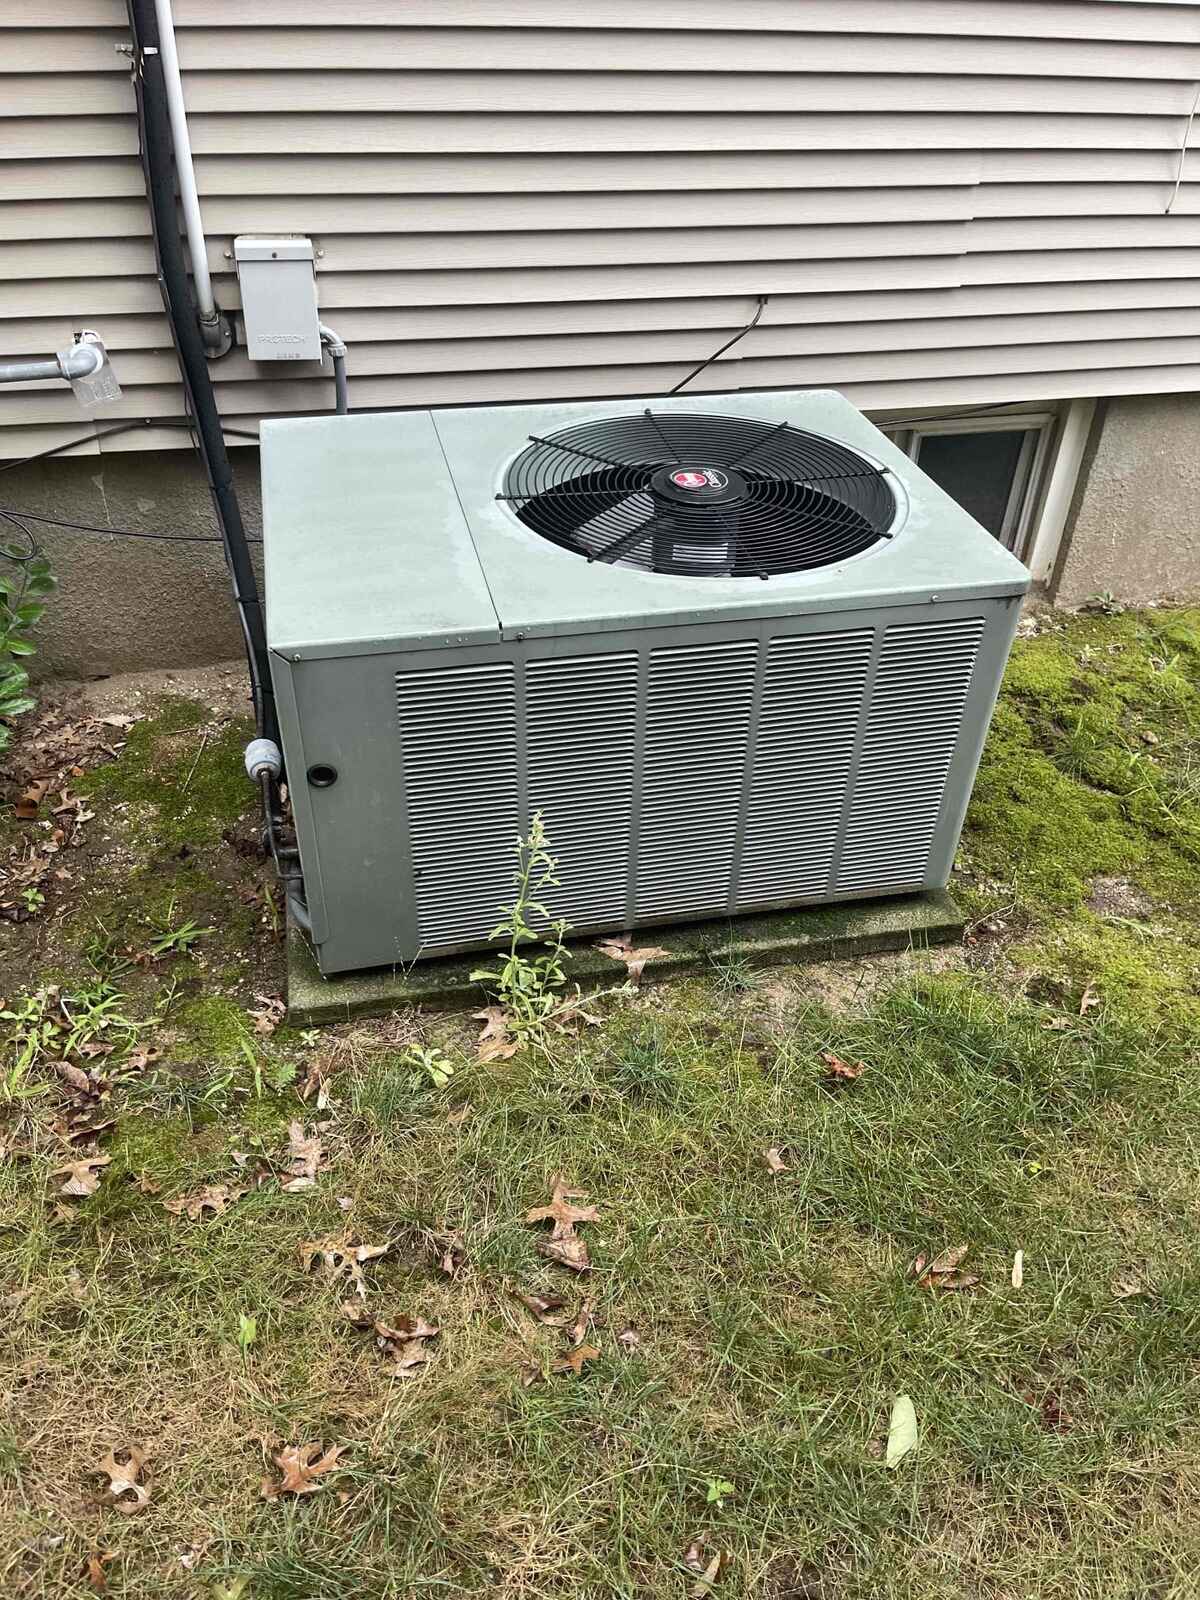 Old outdoor AC unit